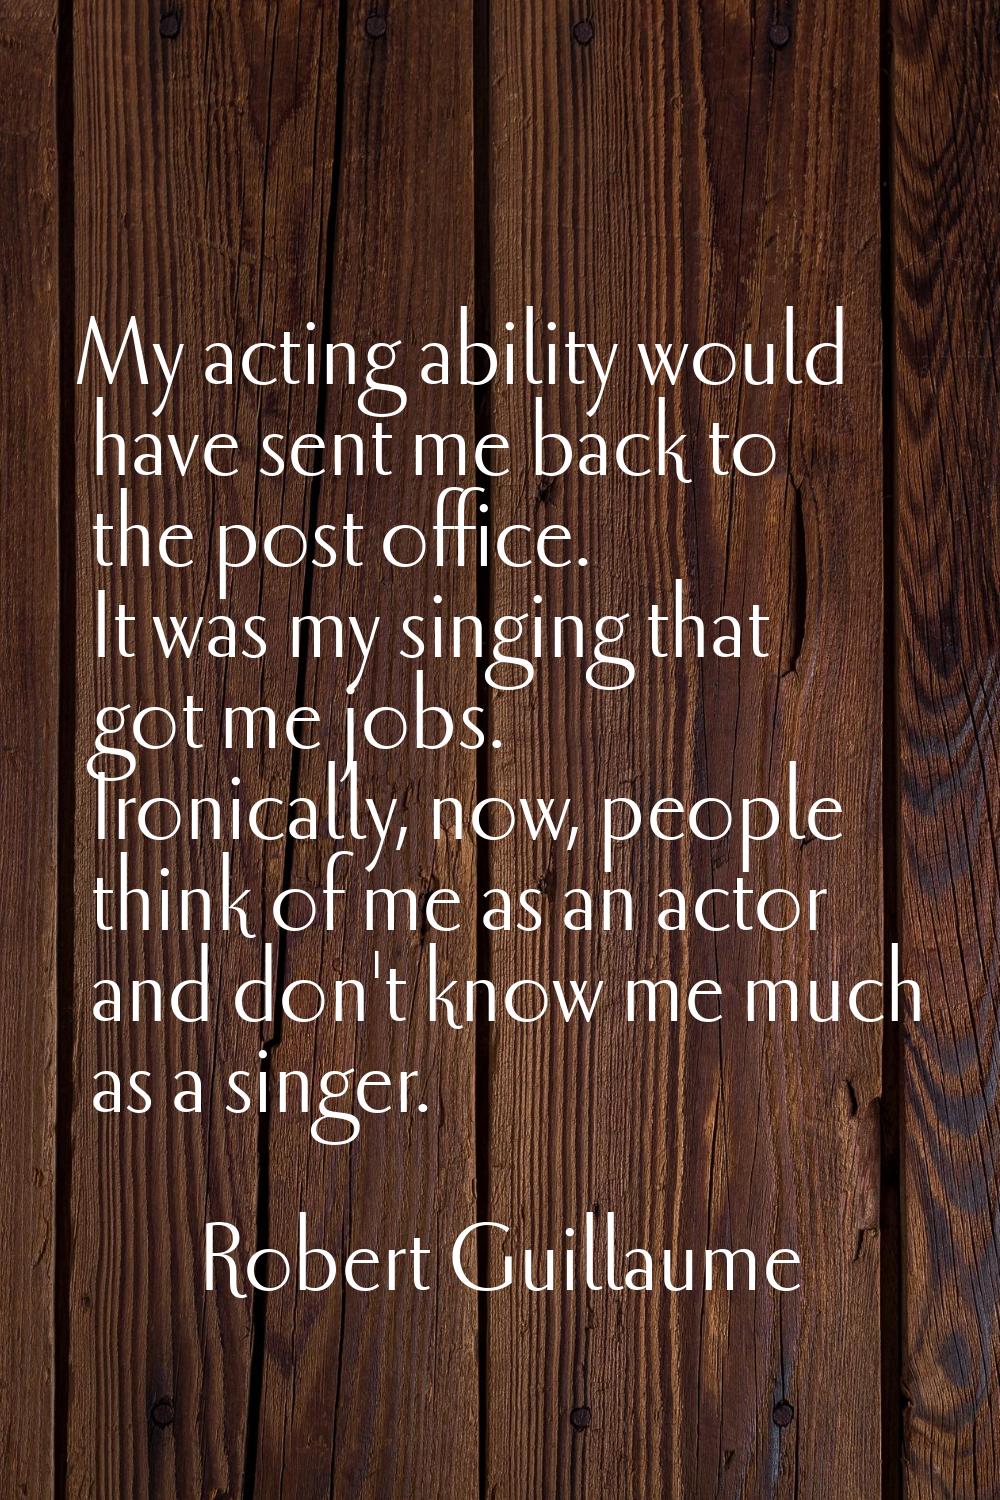 My acting ability would have sent me back to the post office. It was my singing that got me jobs. I